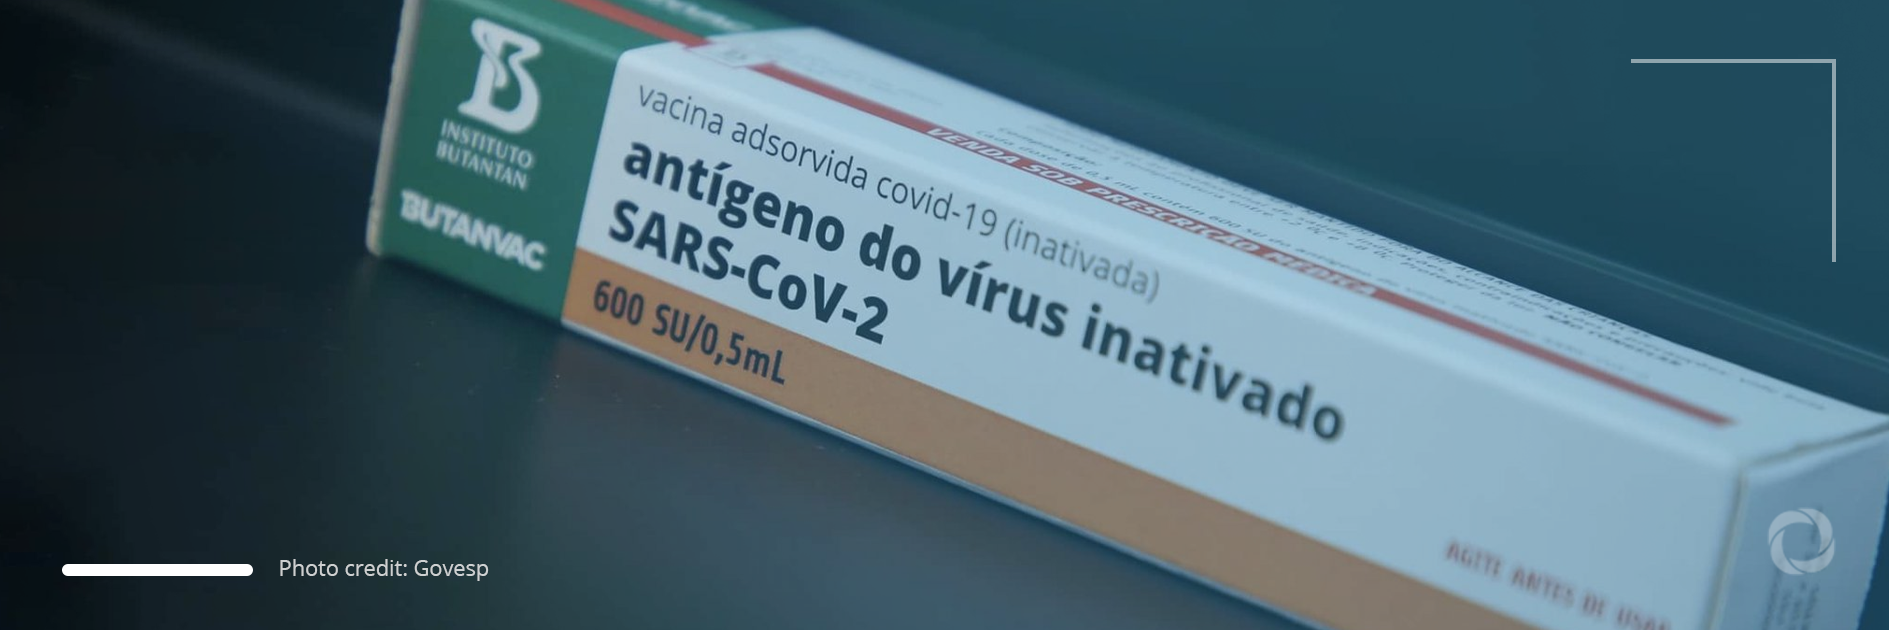 Exclusive video | Brazil invests in cheaper homegrown Covid-19 vaccine for poorer countries